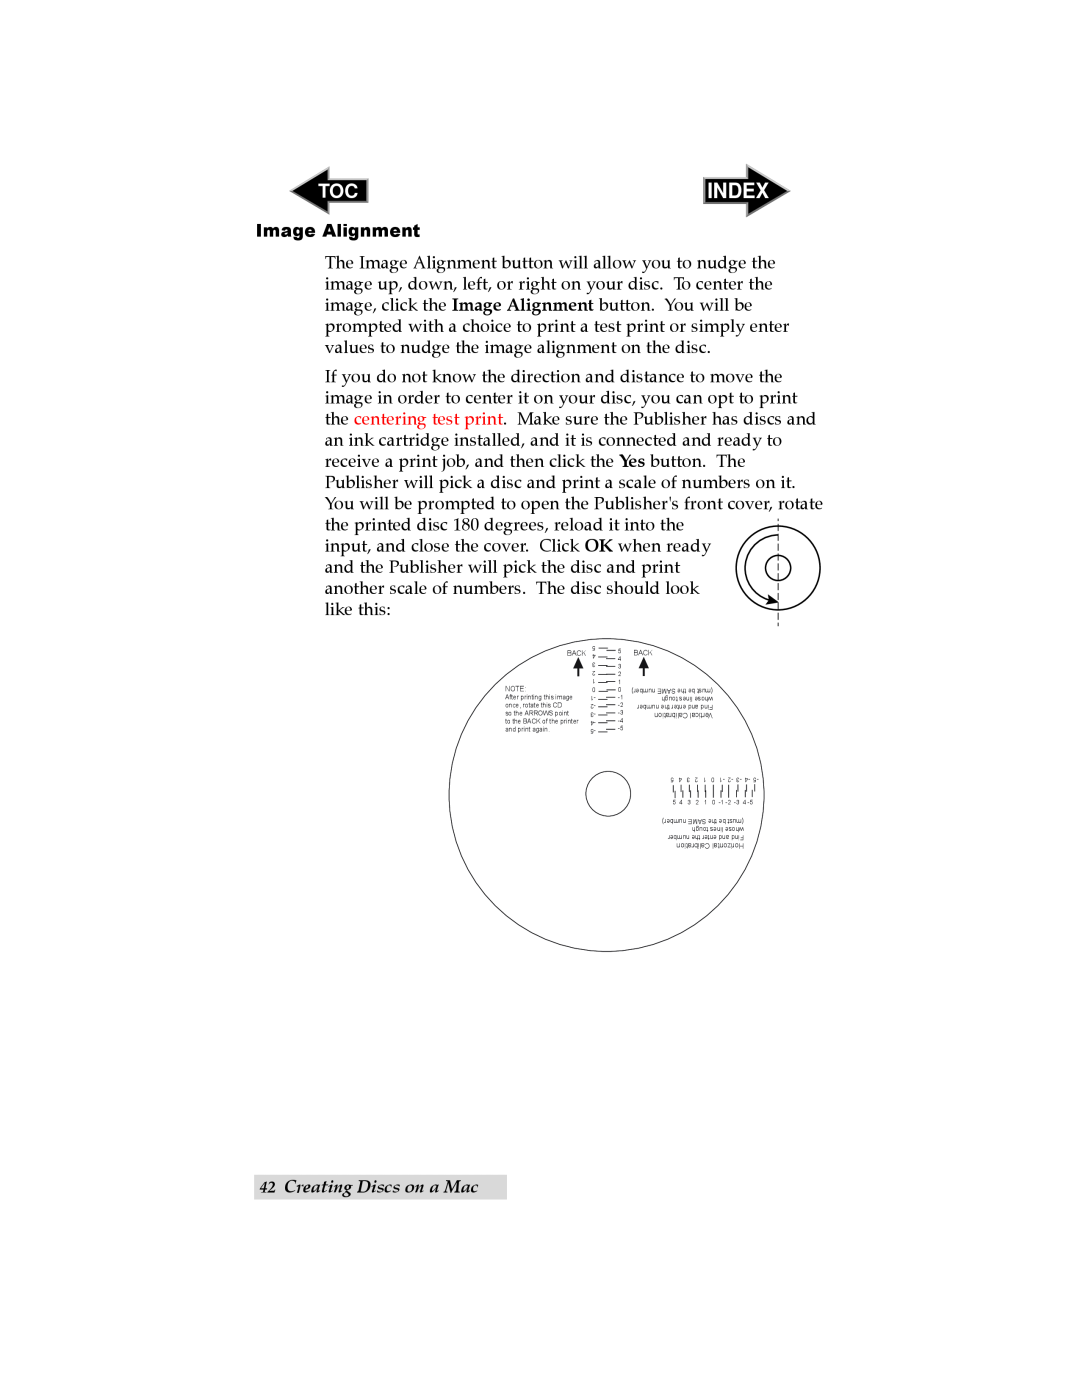 Primera Technology SE user manual Image Alignment, Creating Discs on a Mac, Index 